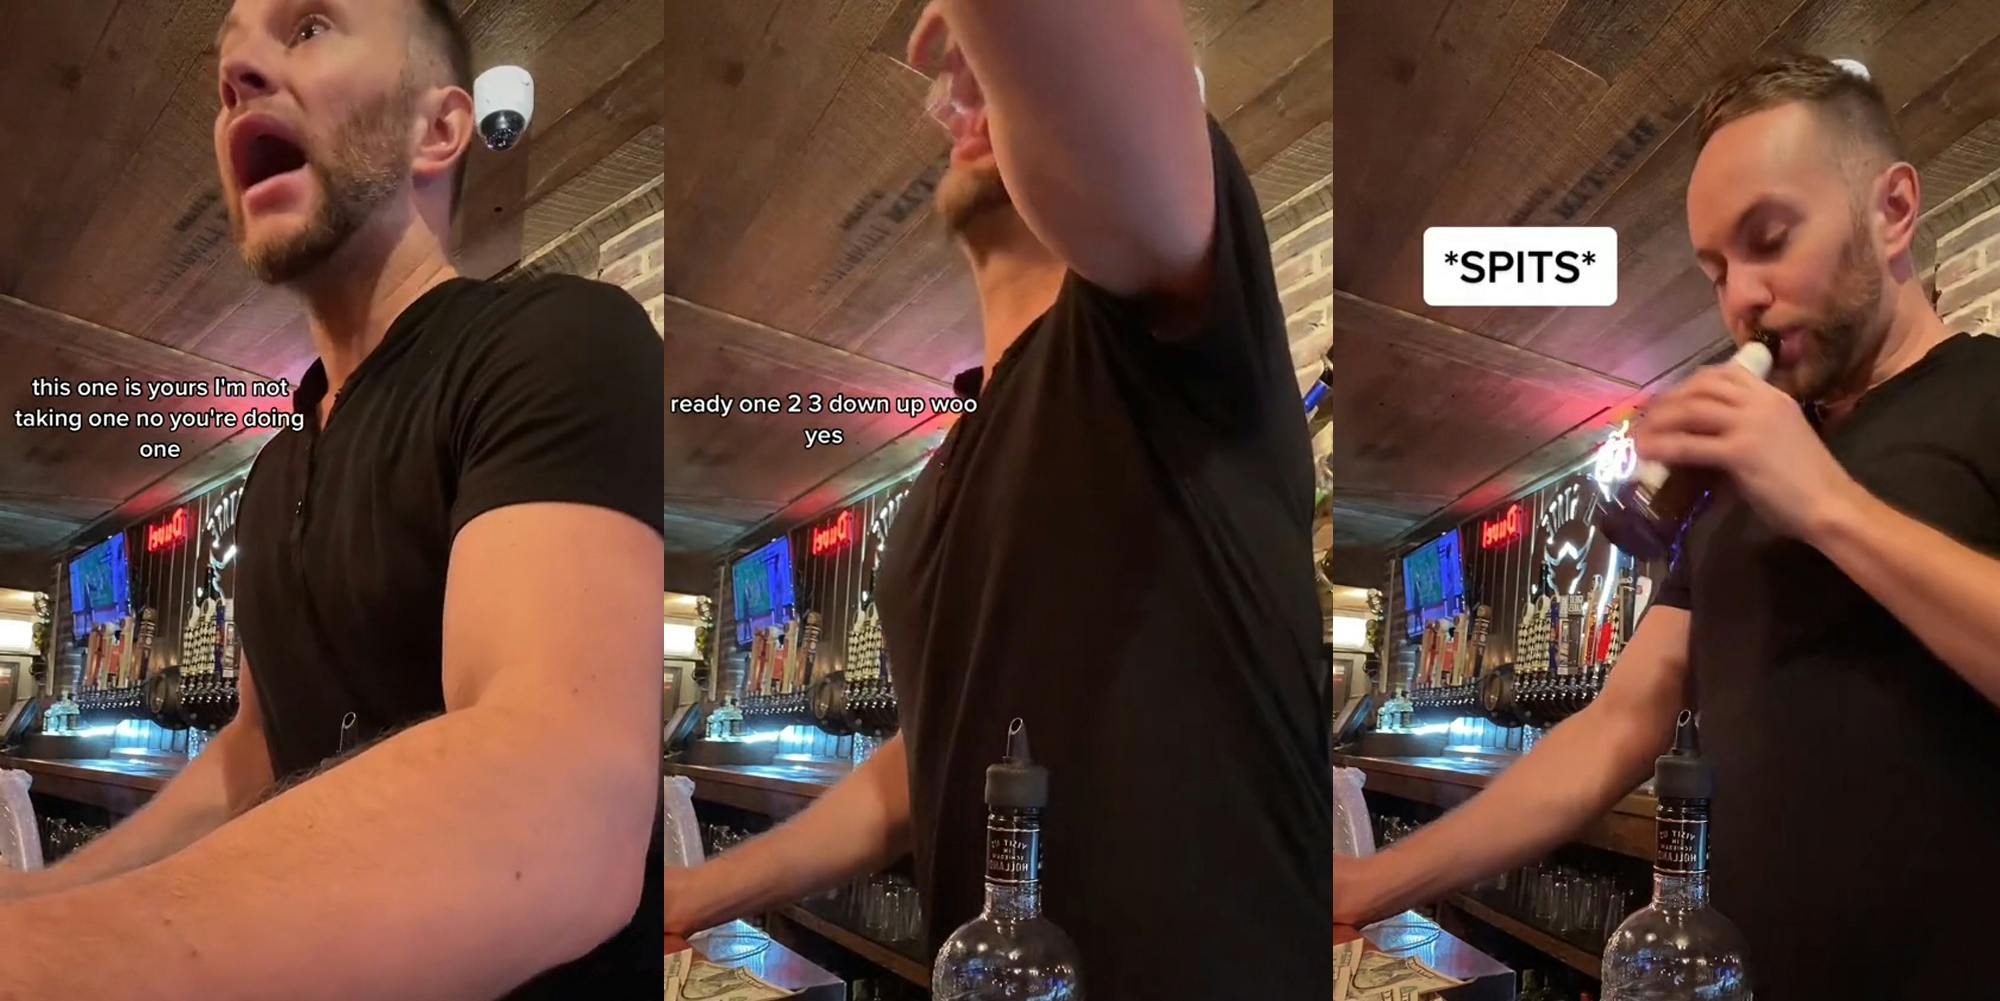 bartender with caption "this one is yours I'm not taking one no you're doing one" (l) bartender taking shot with caption "ready 2 3 down up woo yes" (c) bartender spitting into beer bottle with caption "*SPITS*" (r)